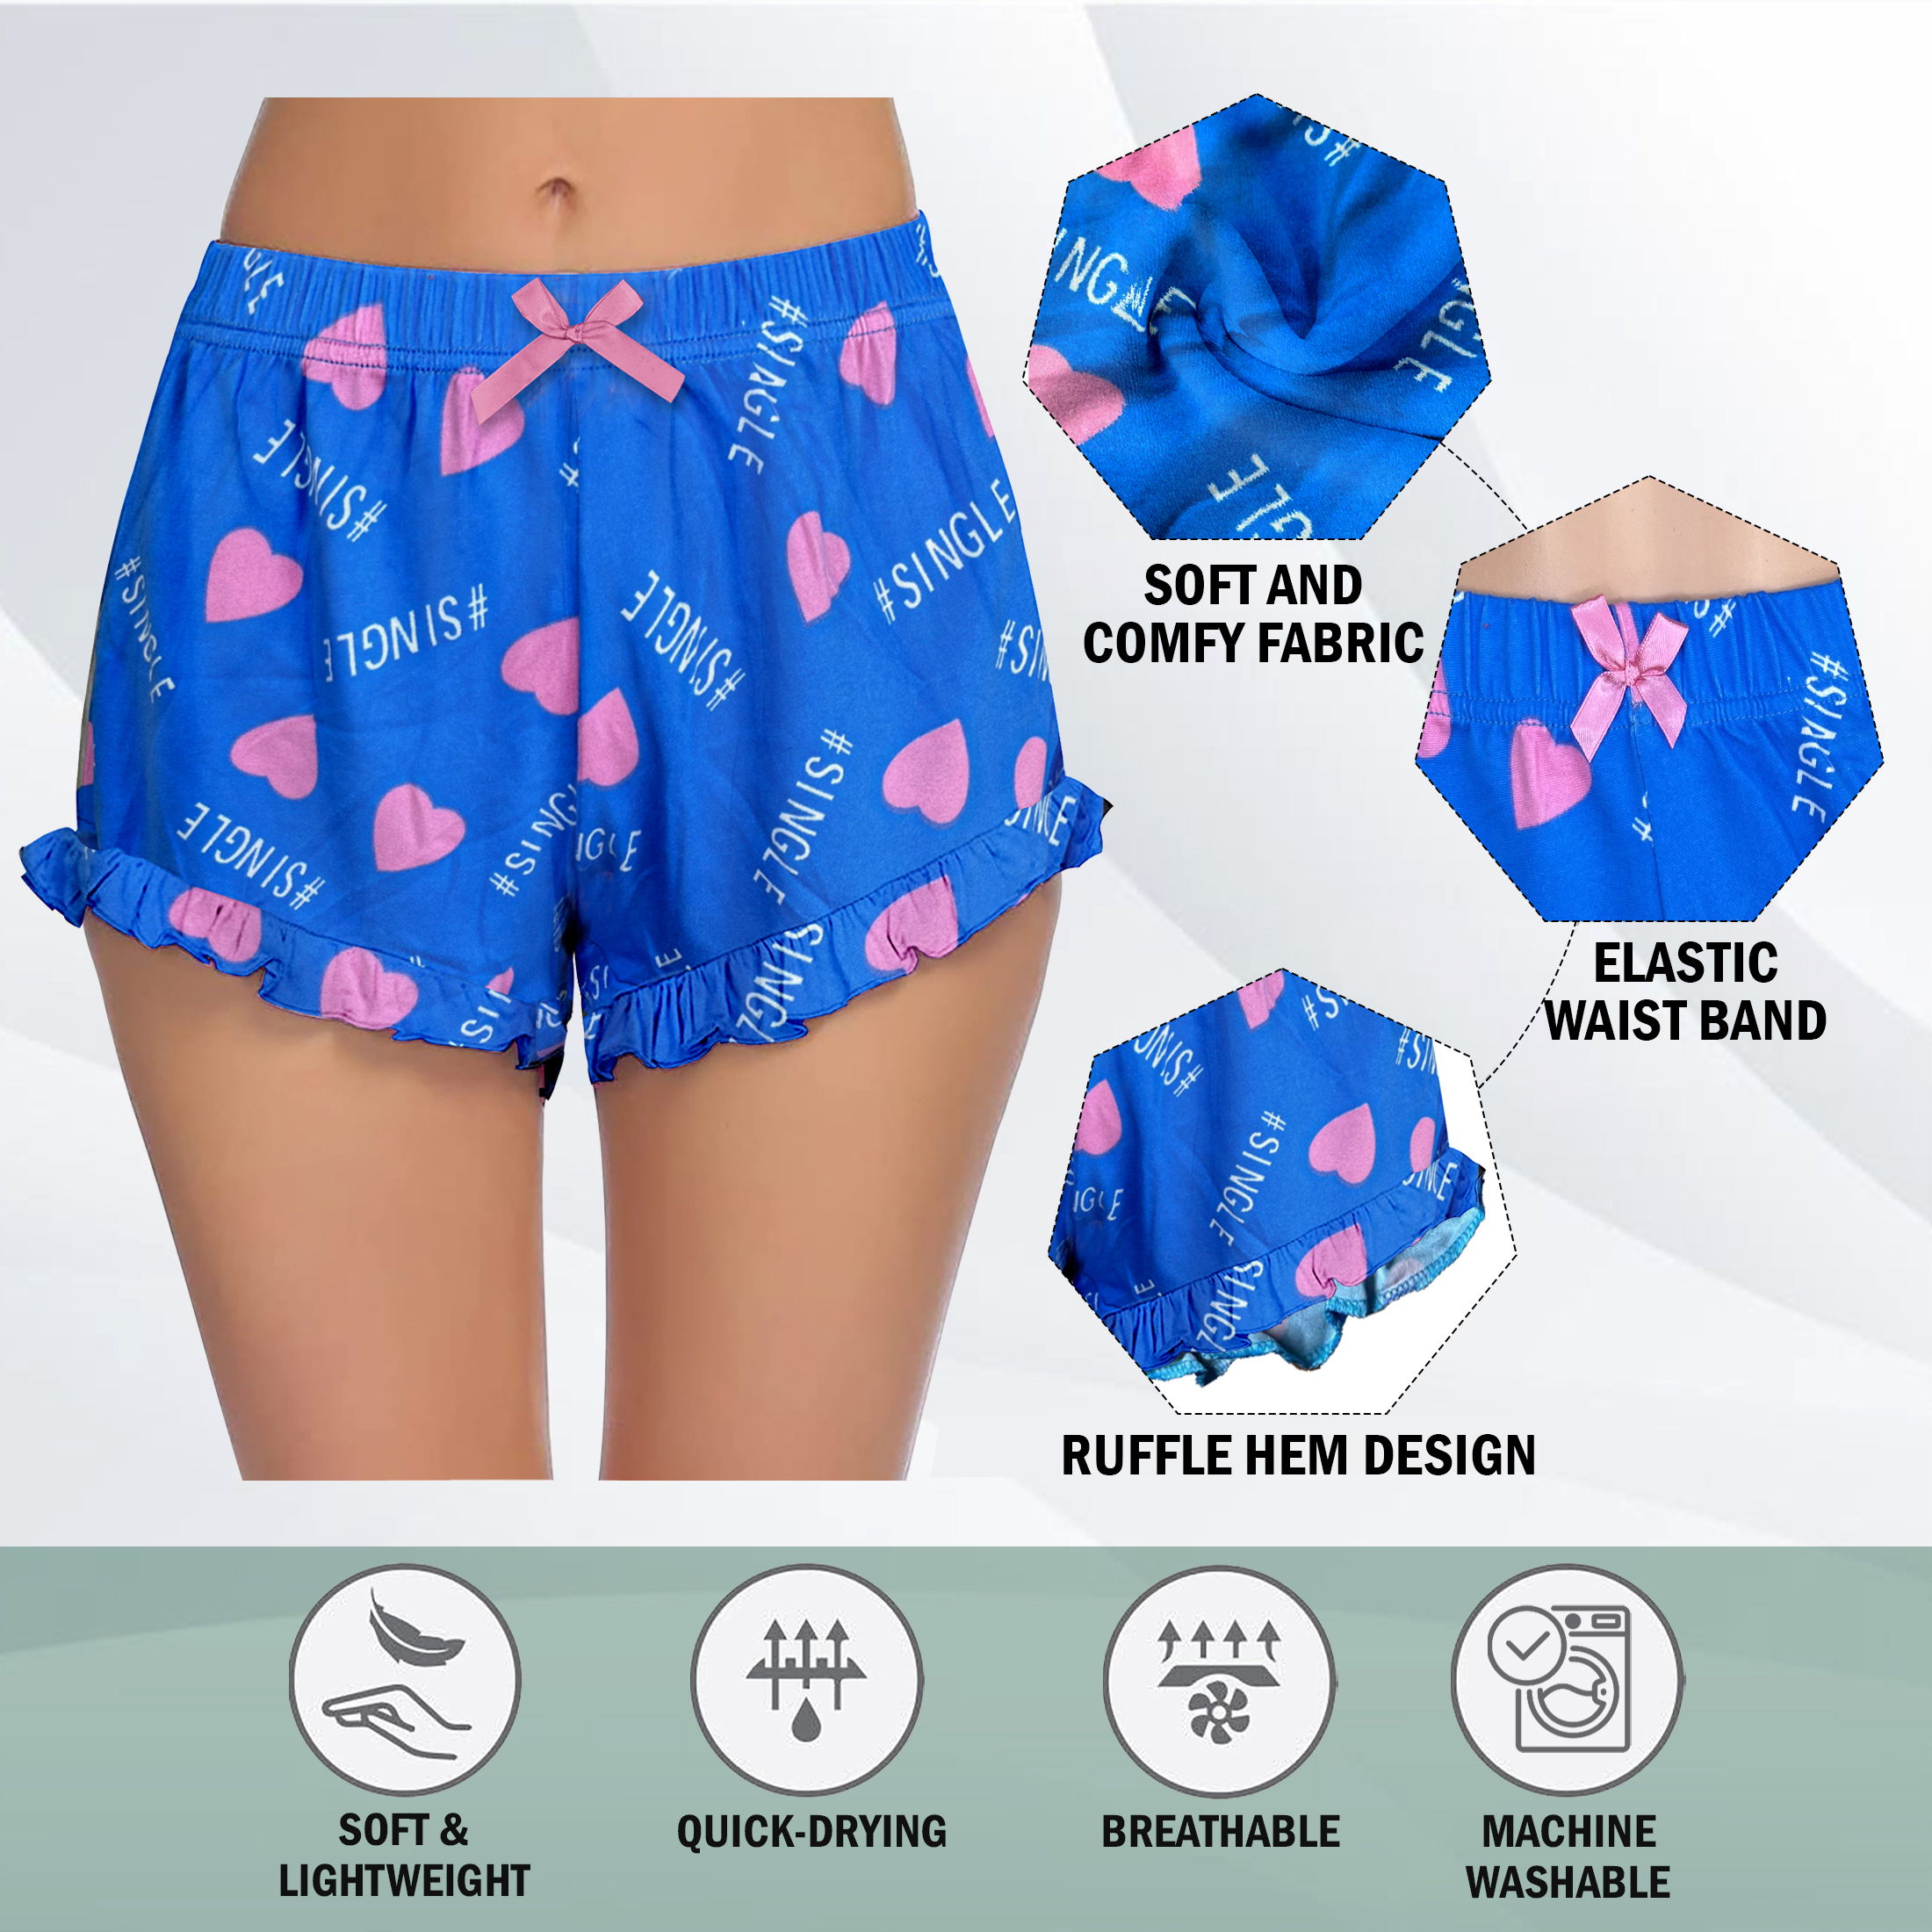 6-Pack Women's Casual Printed Pajama Shorts Soft Stretchy Relaxed Fit Ladies Summer Yoga Bottoms - S